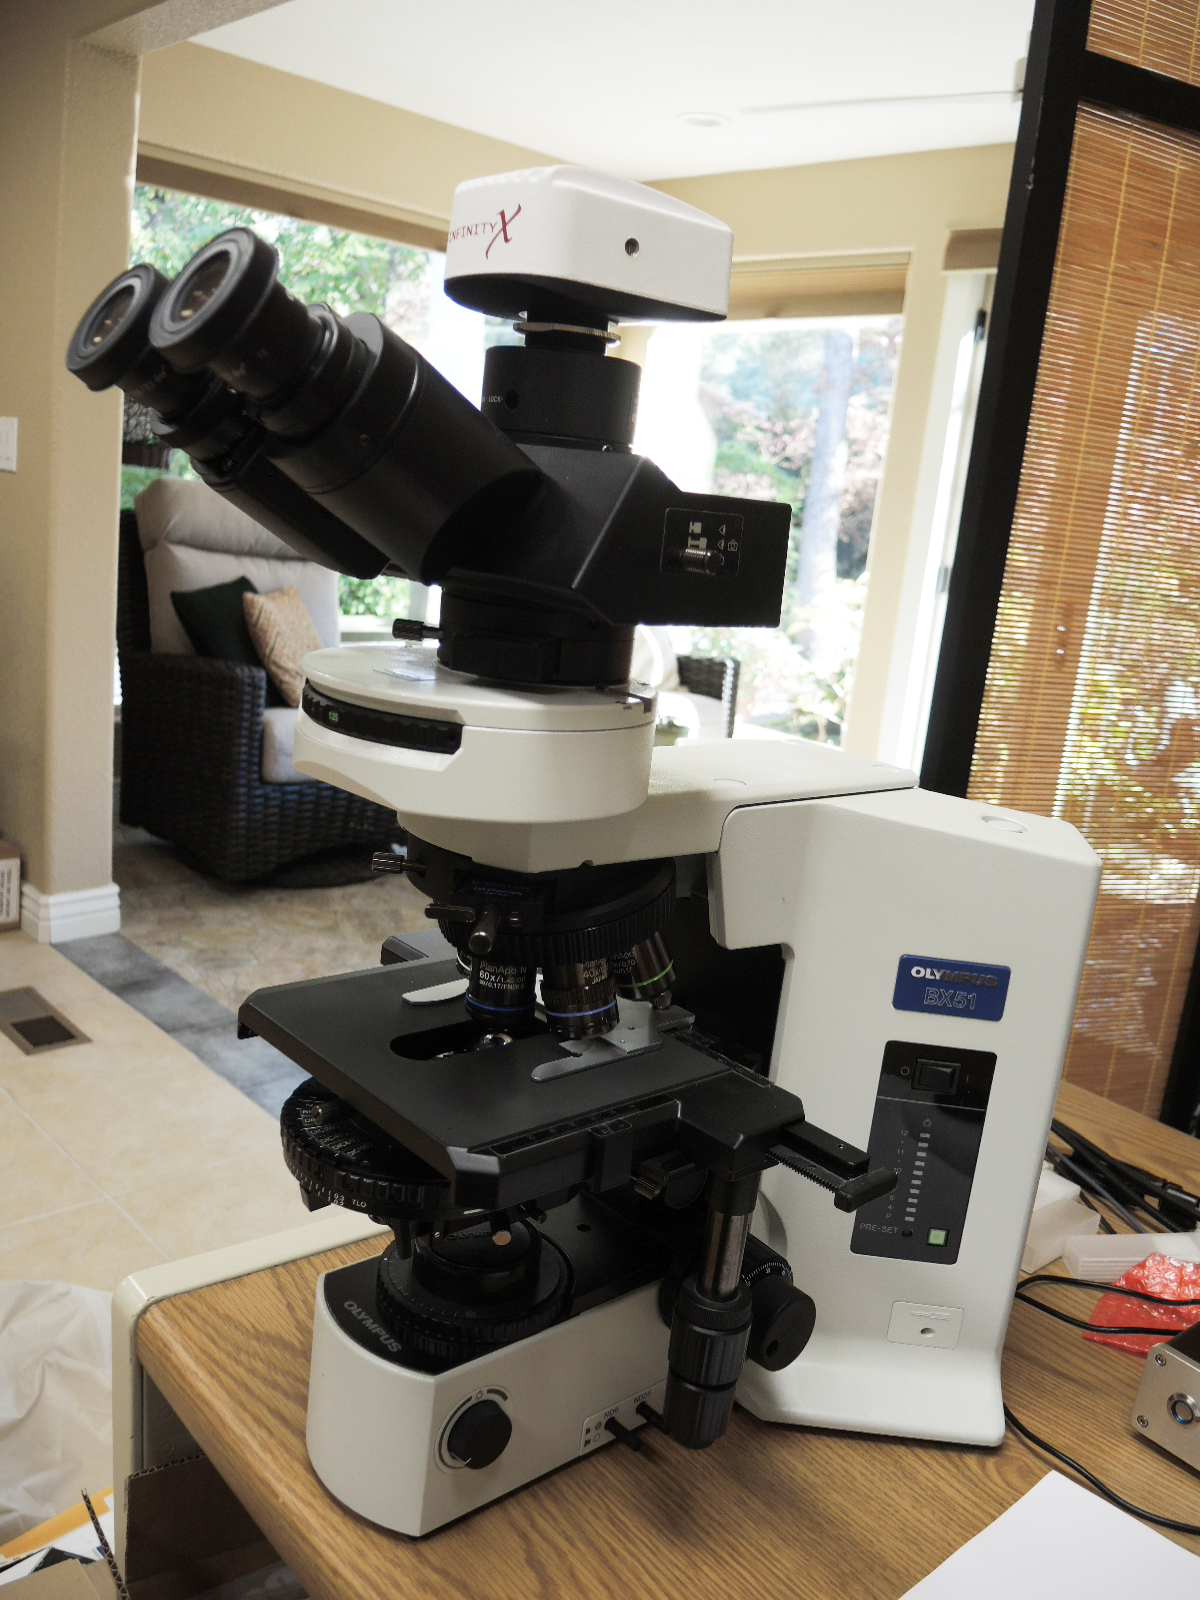 Olympus BX-51T research grade biological transmitted light microscope for BF/DF/DIC/Phase analysis methods